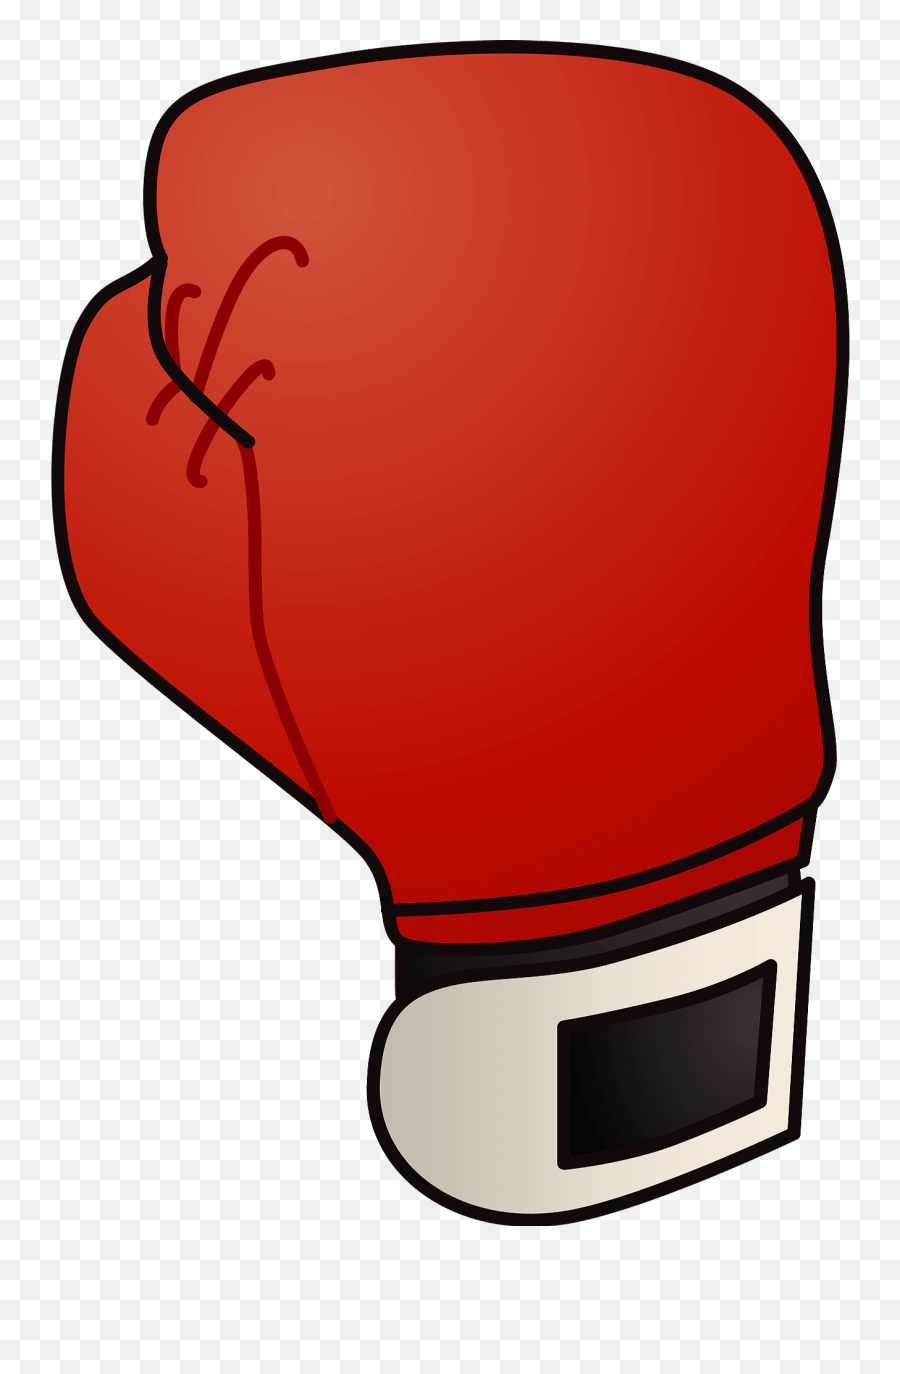 Boxing Glove Clipart - Boxing Glove Clipart Emoji,Boxing Gloves Clipart